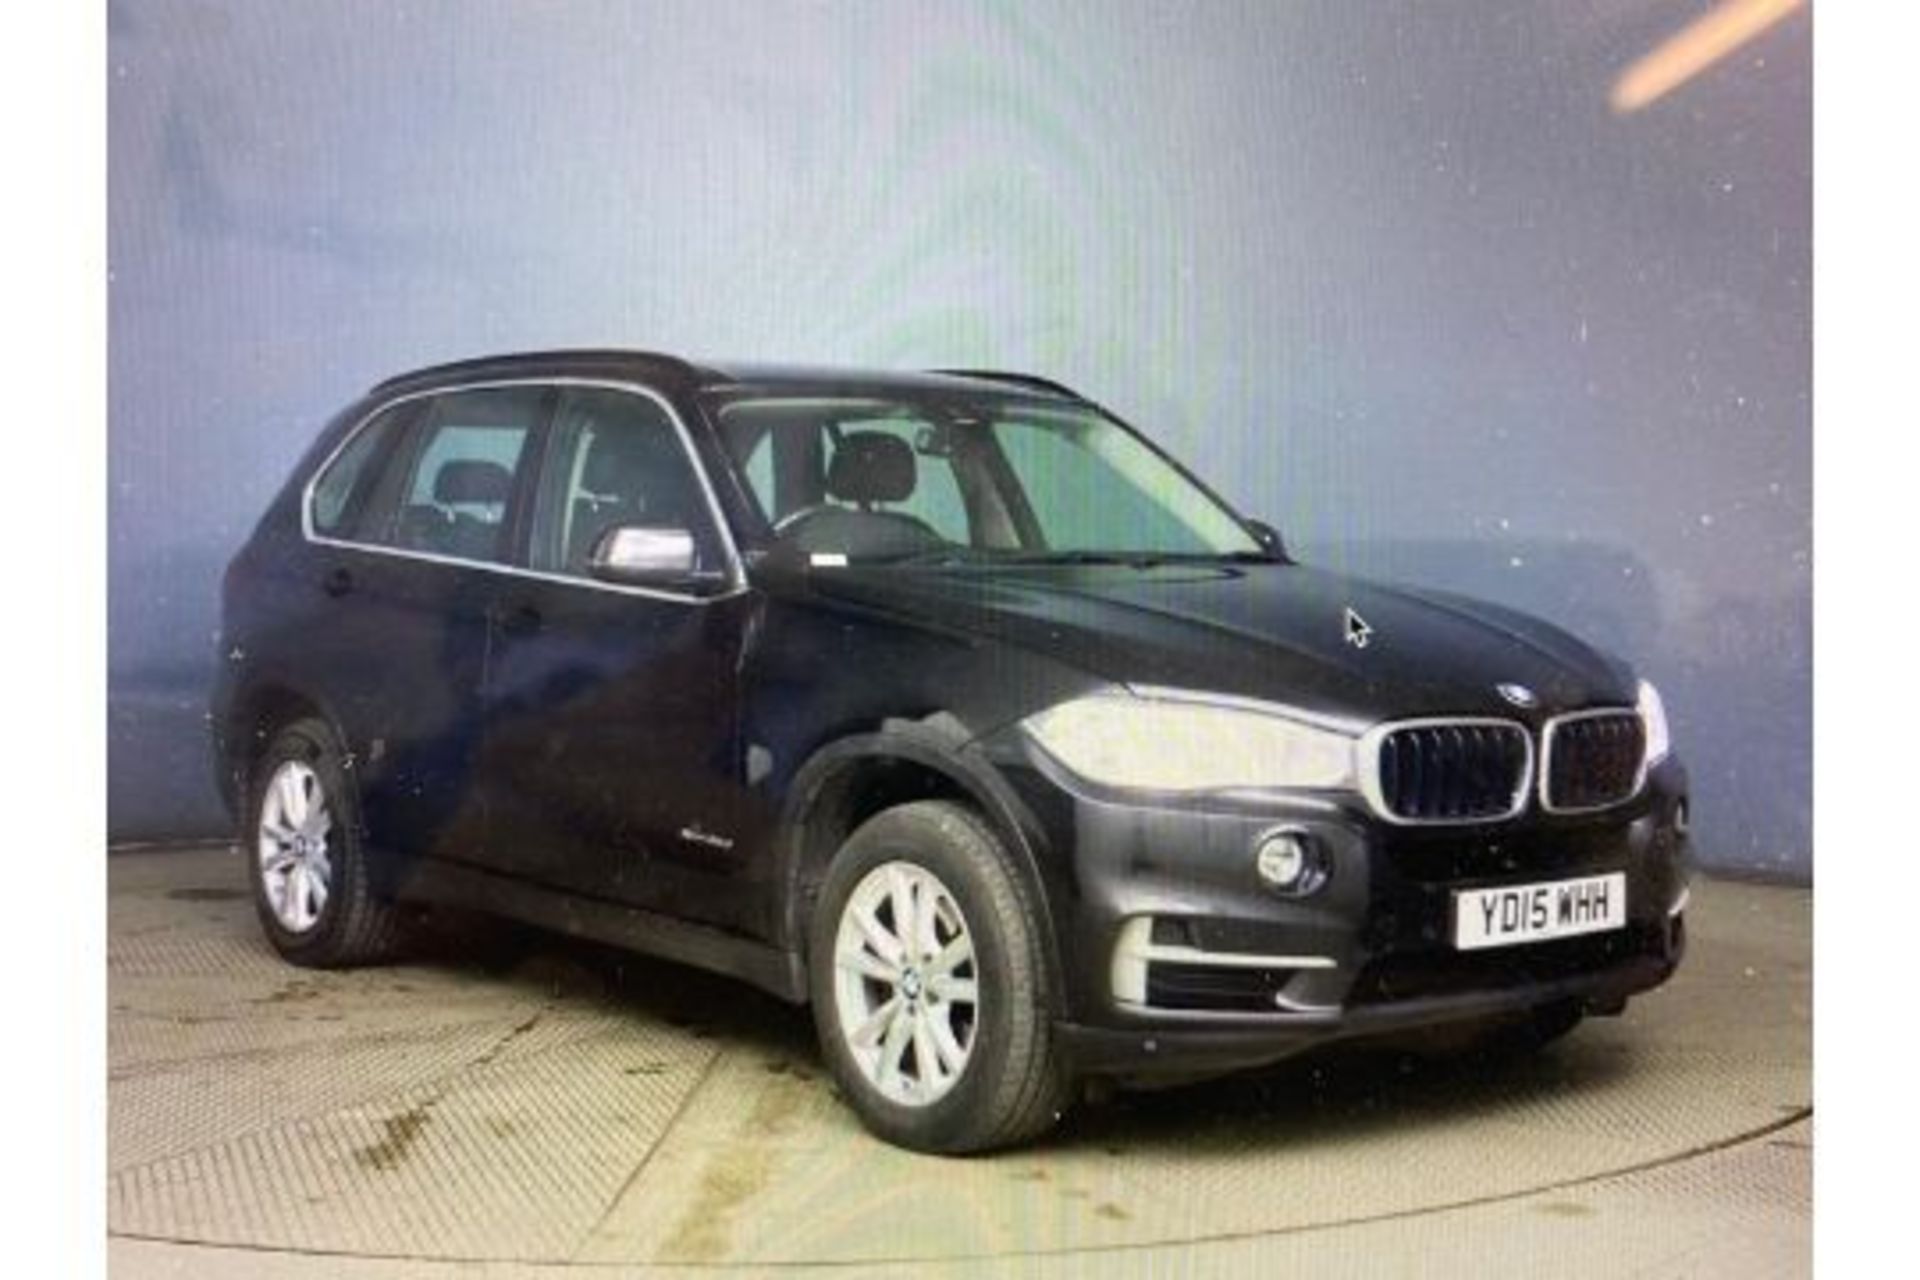 BMW X5 3.0d xDrive"Auto"Special Equipment -15 Reg -7 Seater -Leather - Sat Nav - No Vat - Image 3 of 12